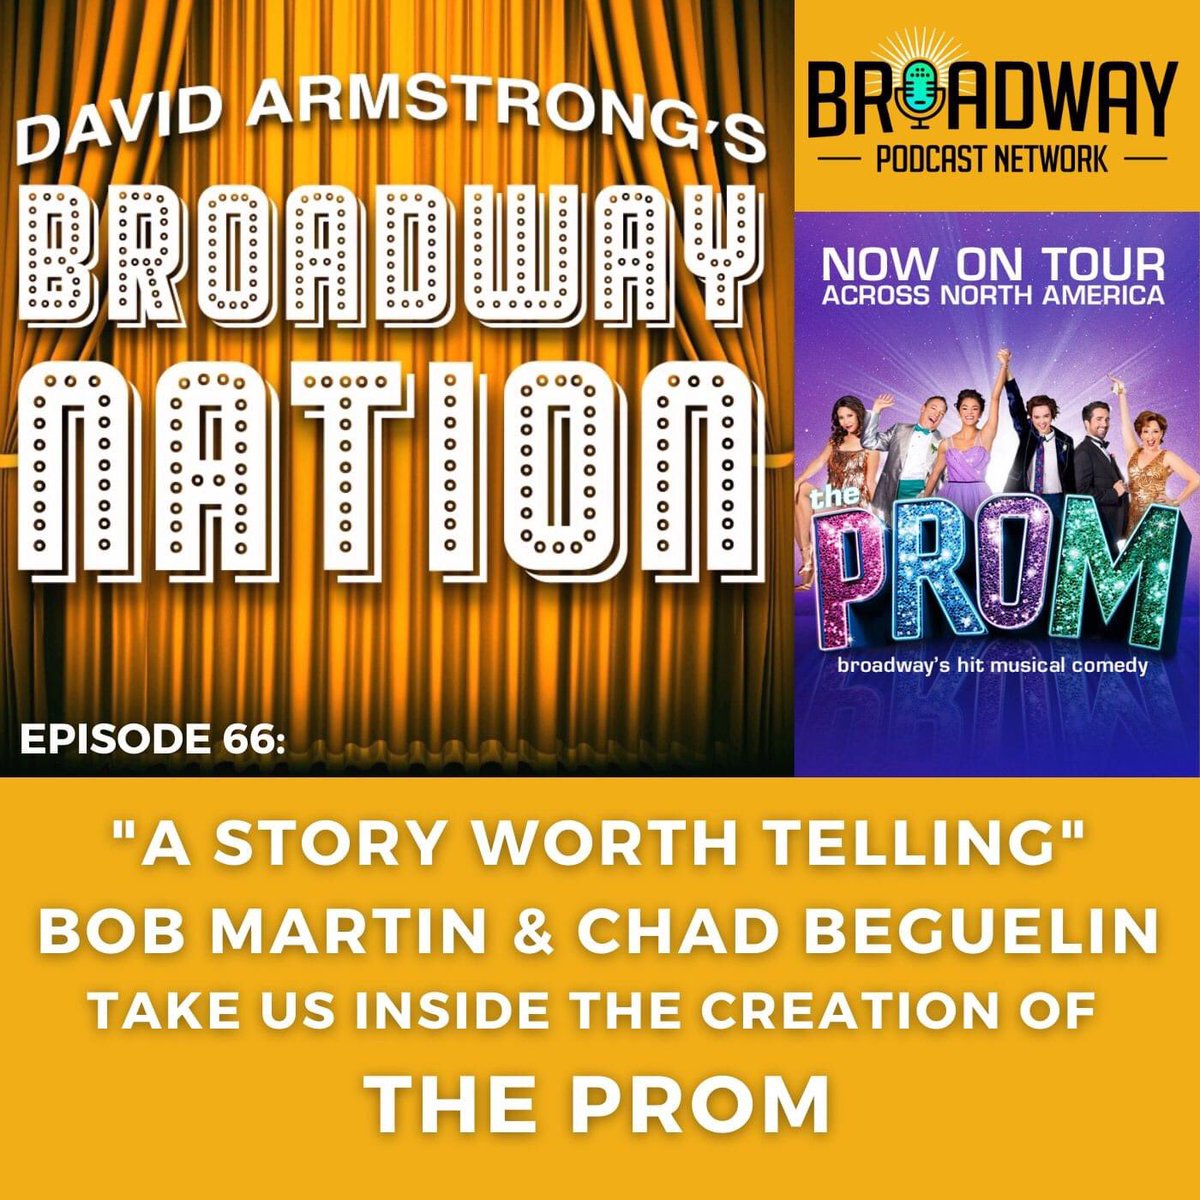 The latest episode is out & my guests are Bob Martin & Chad Beguelin who joined me to talk about the creation of @ThePromMusical currently on tour across the US and opens at Seattle’s @5thAveTheatre, my old stomping grounds. on May 31. @BwayPodNetwork @ChadBeguelin #Broadway